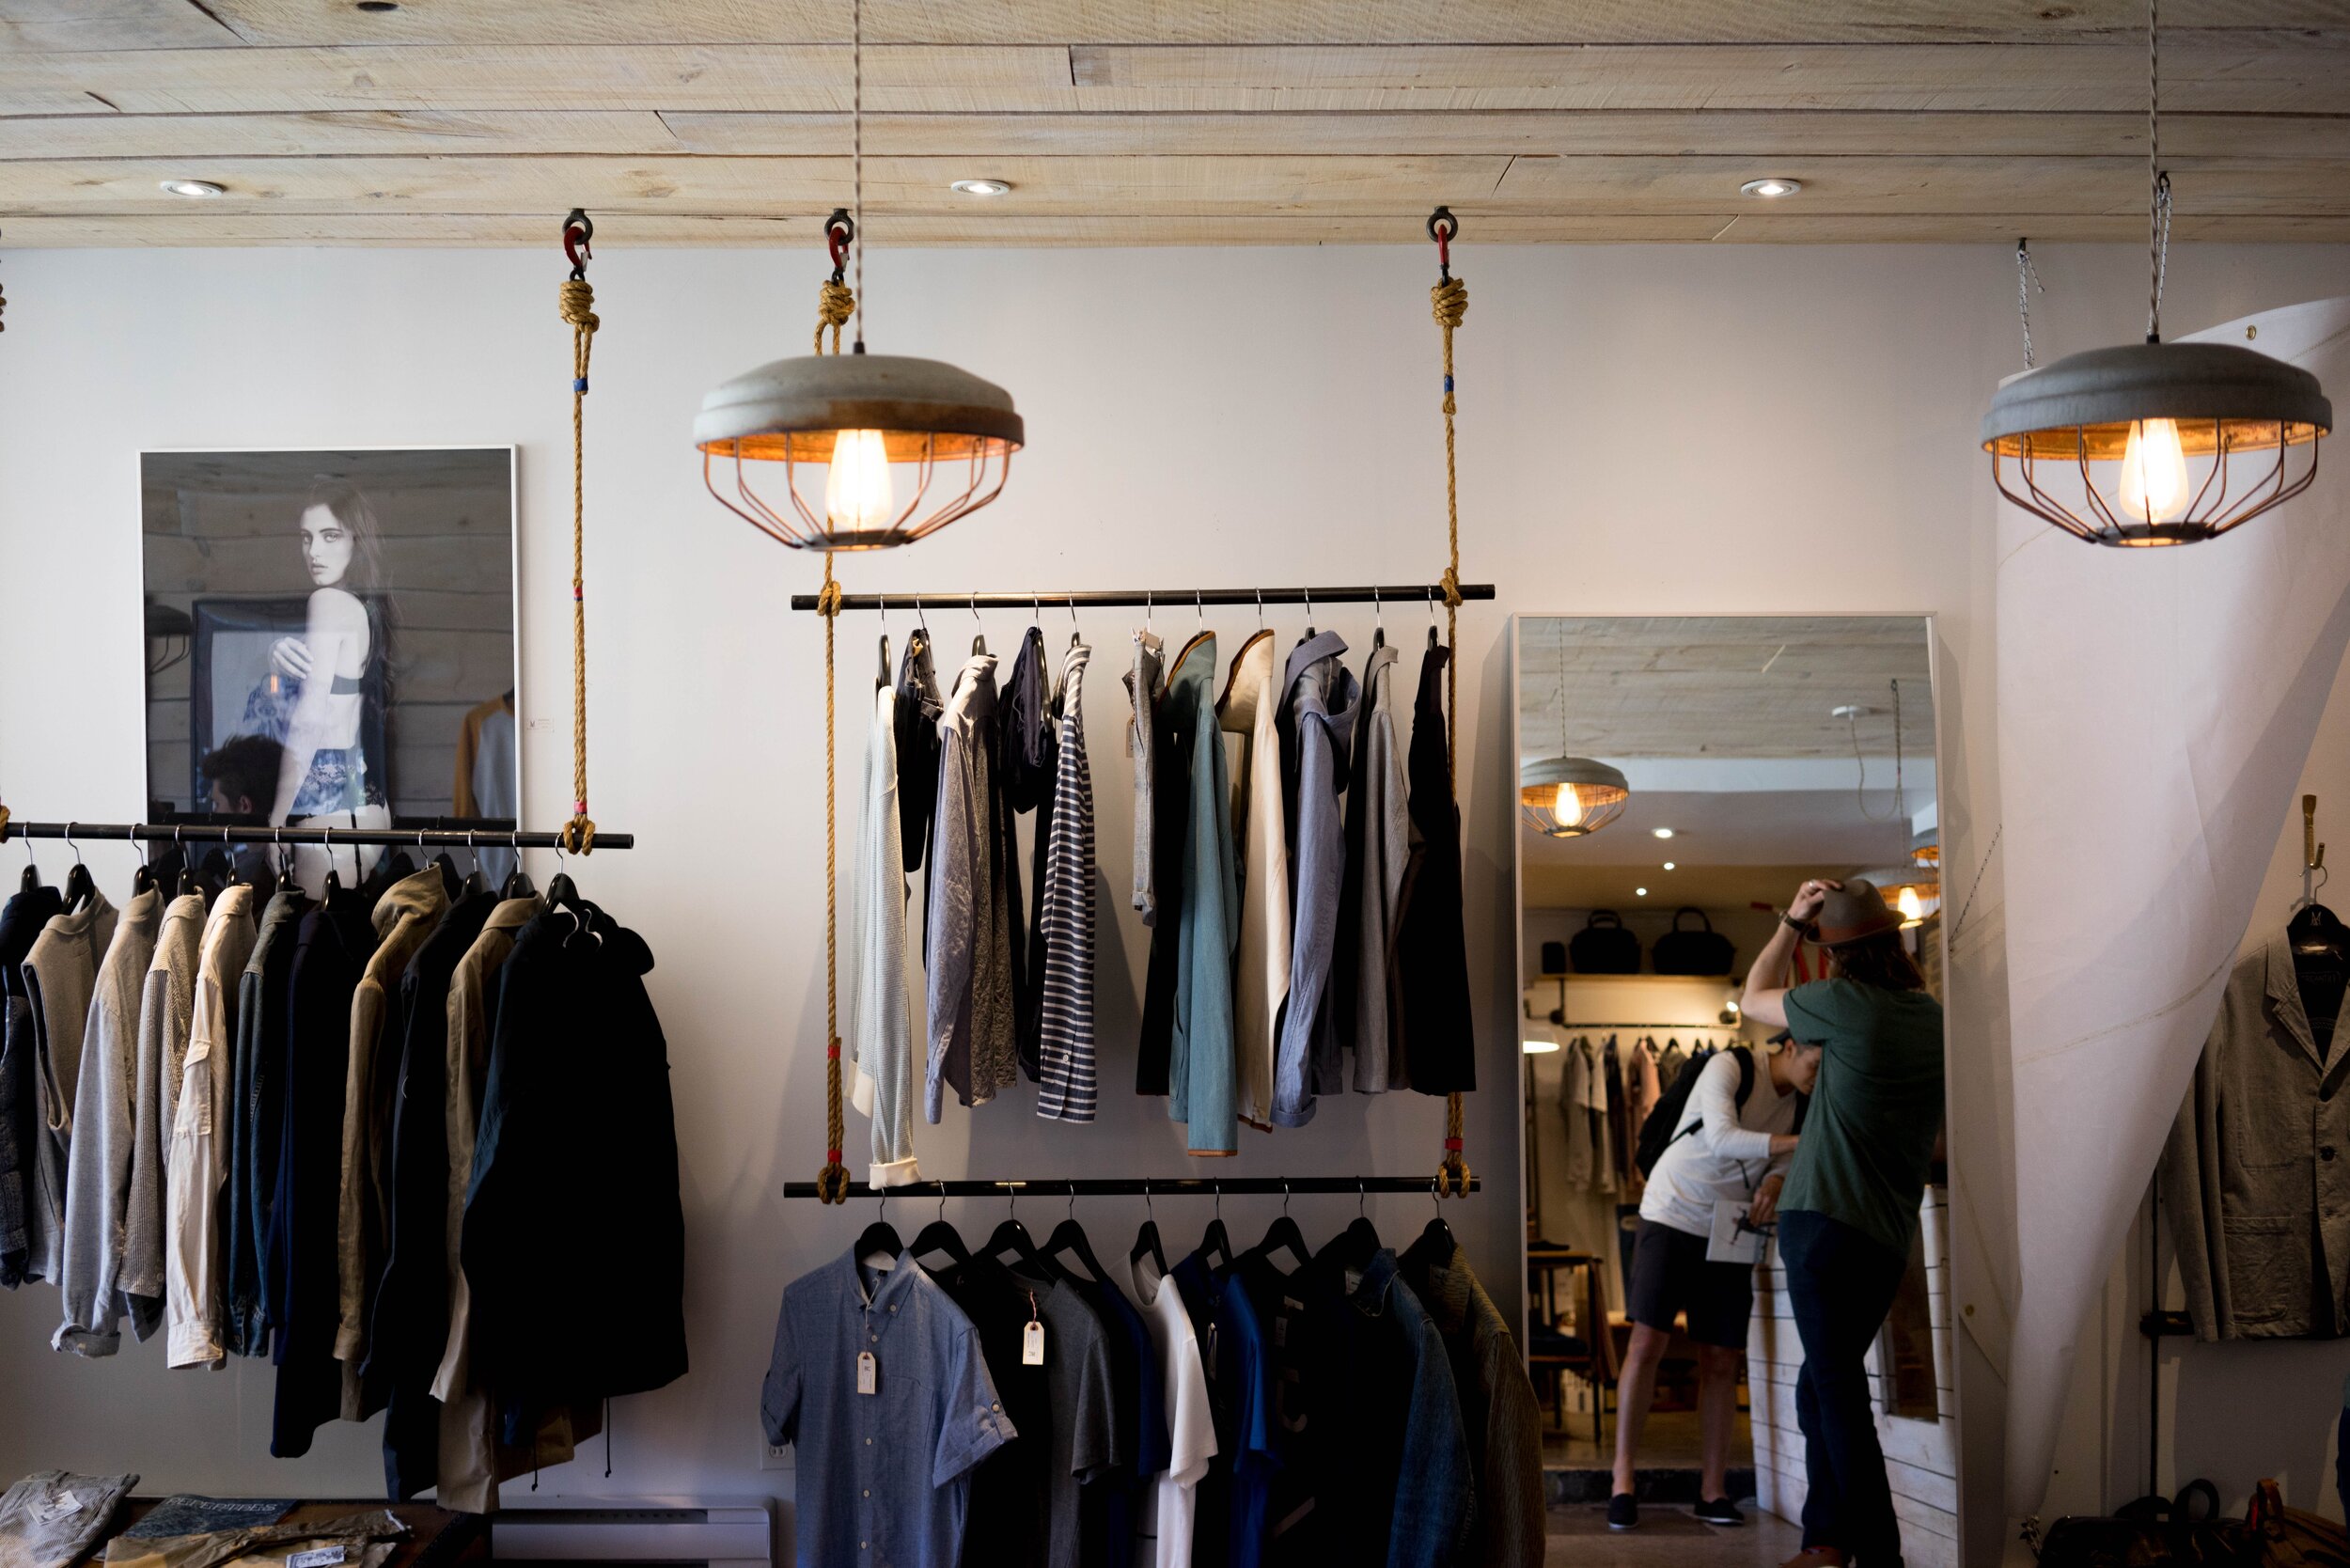 How to Take Your Retail Spaces to a Sustainable Level